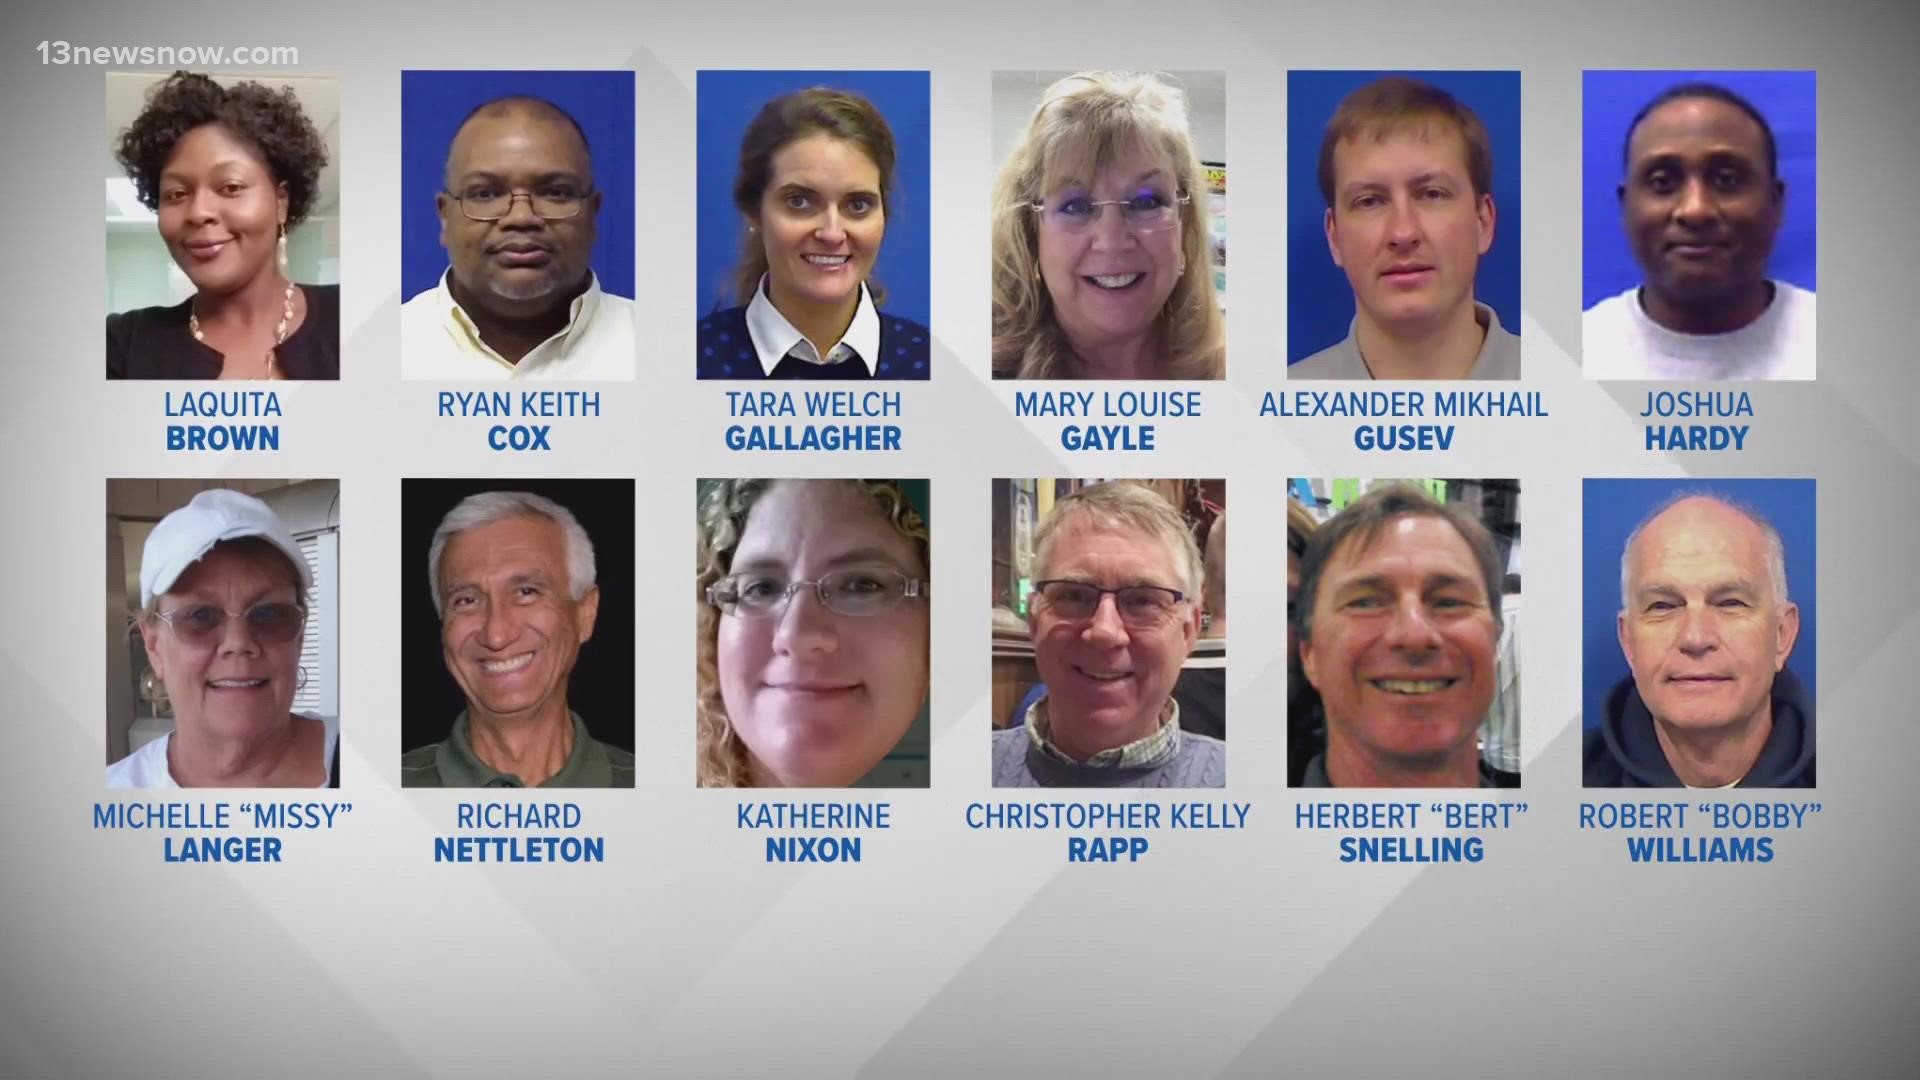 The memorial will honor the 12 lives lost at the Municipal Center shooting in May of 2019.